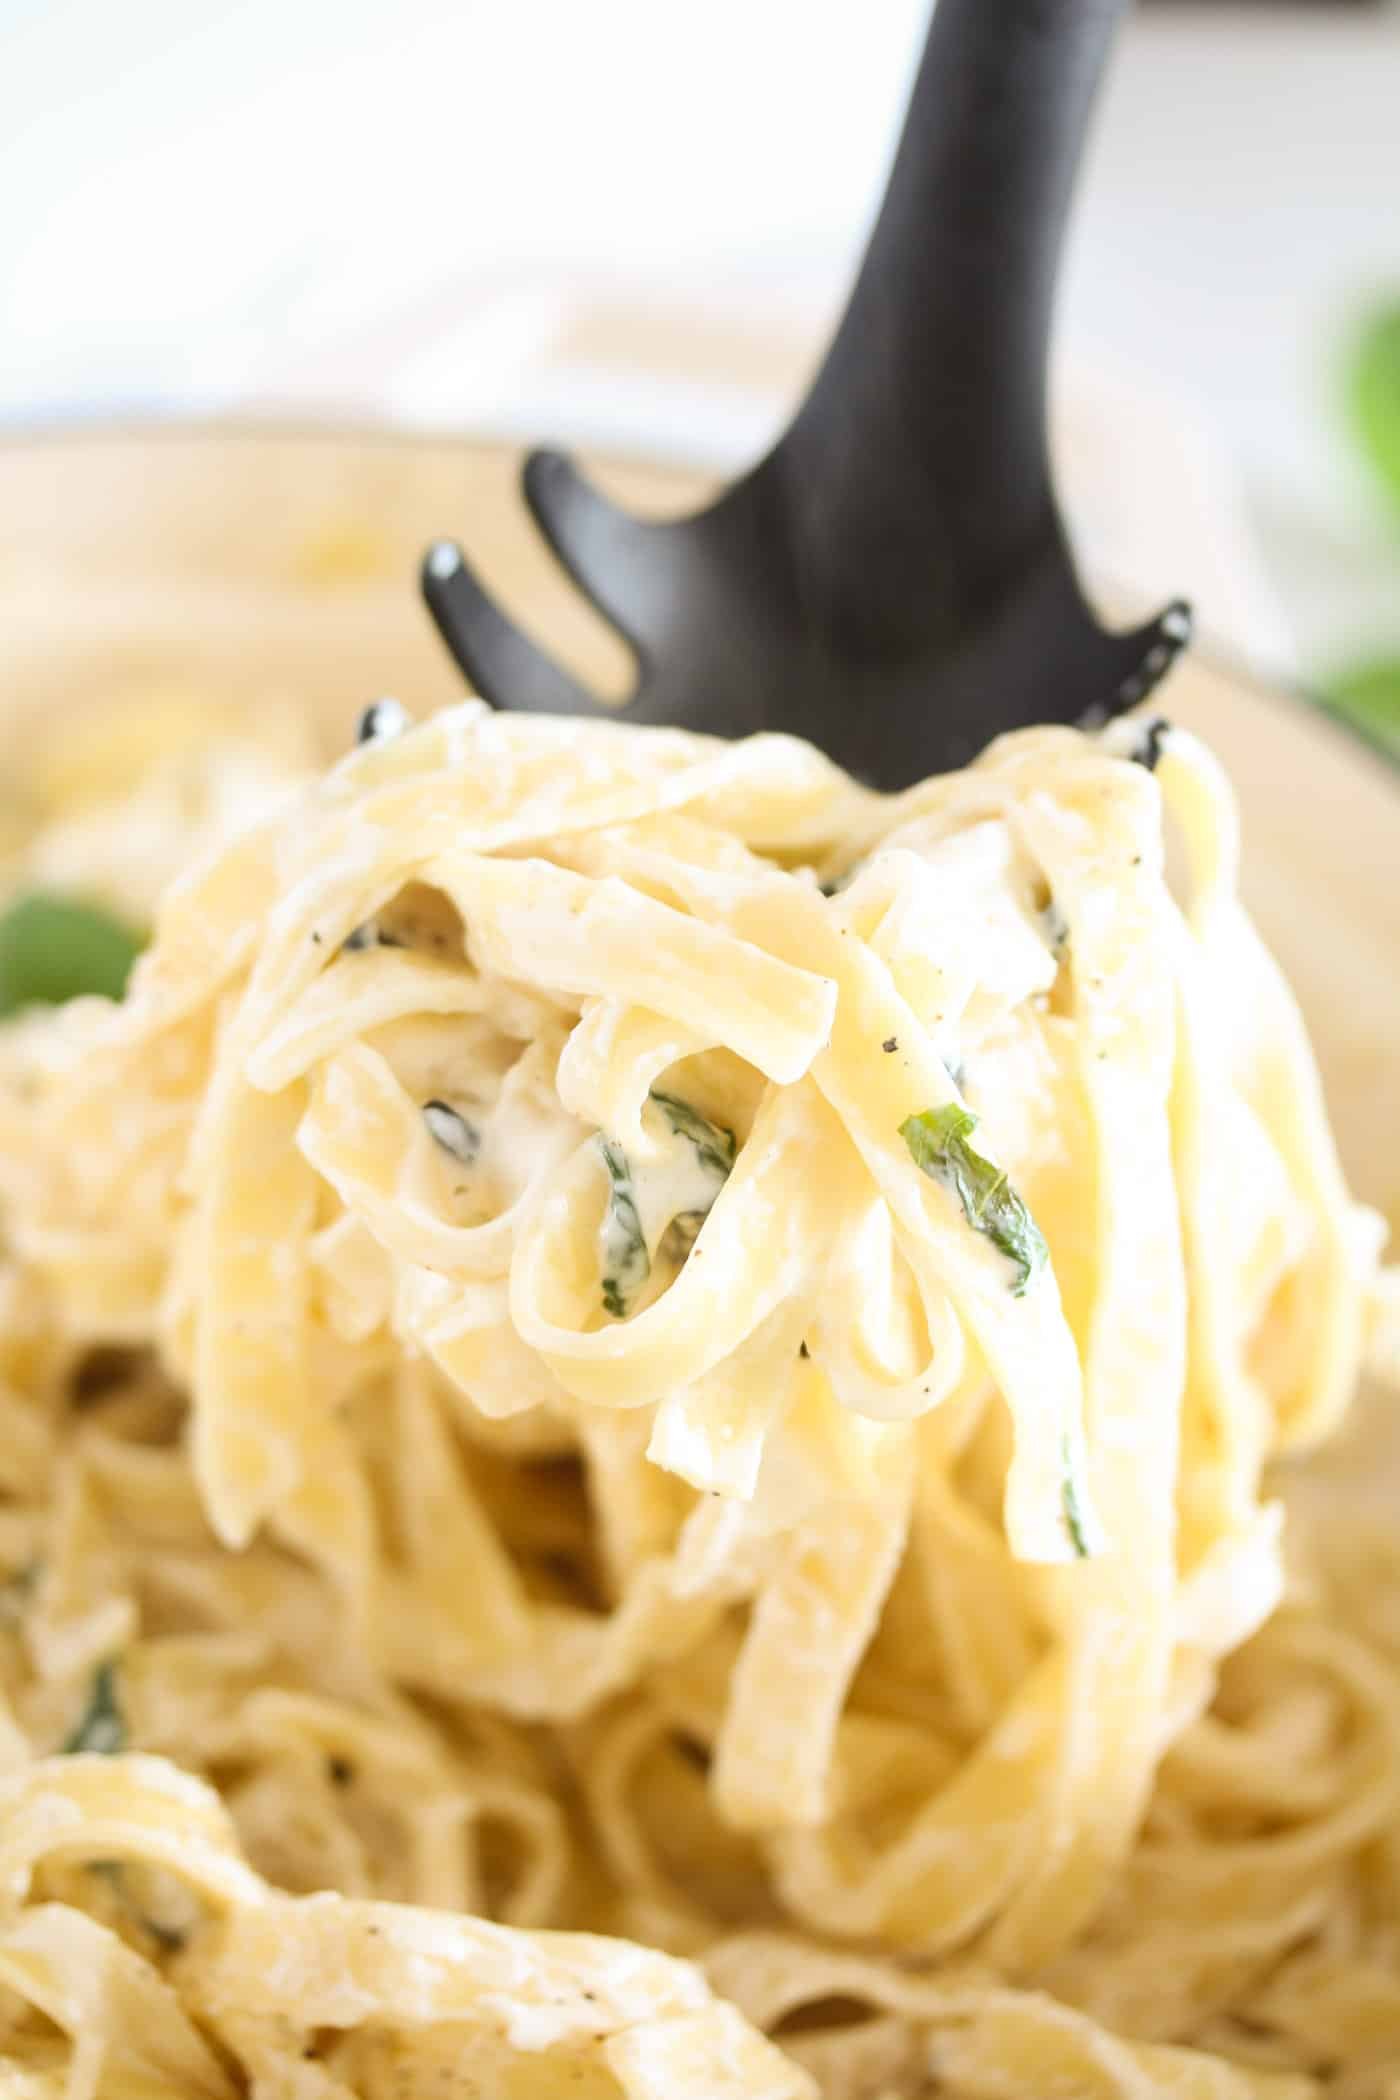 bunch of creamy noodles held by a black serving spoon.